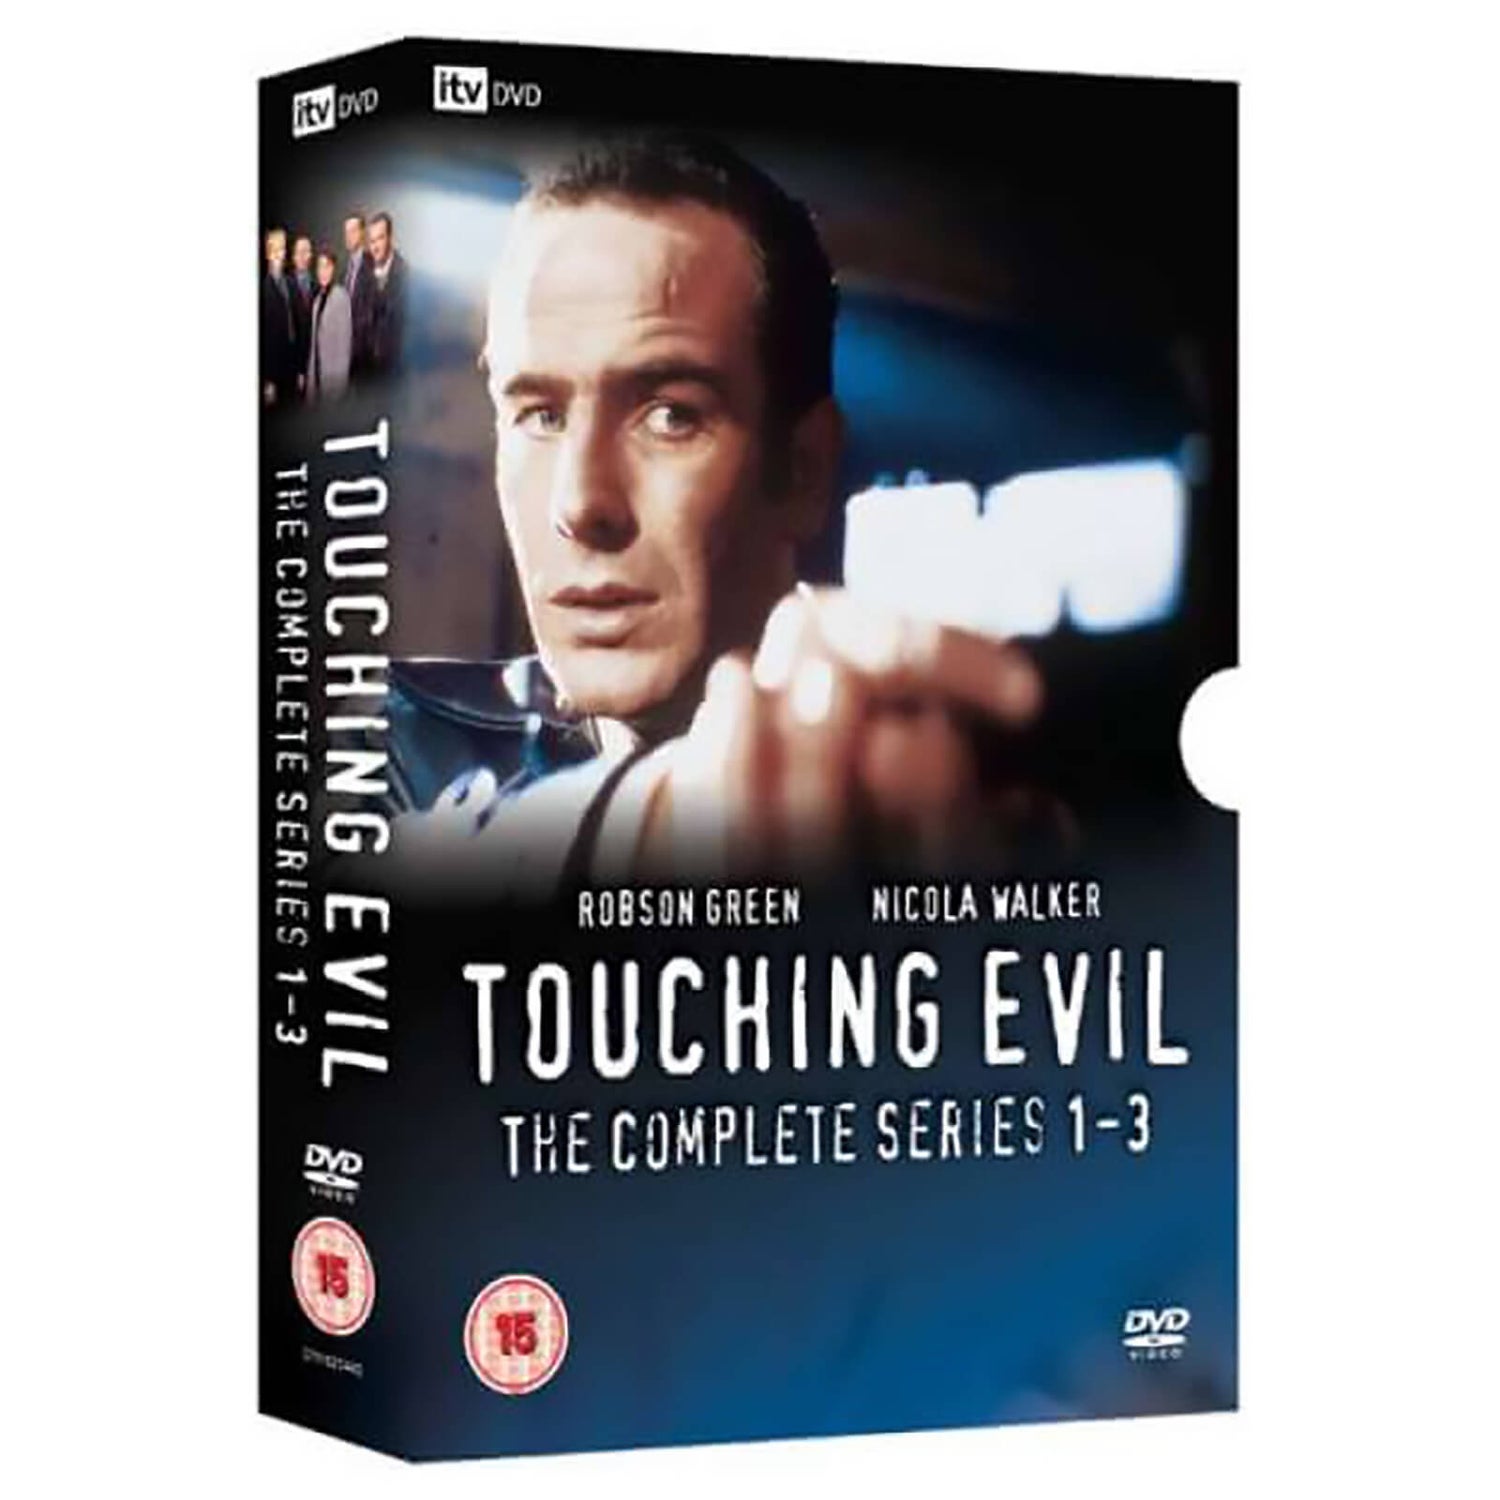 Touching Evil - Complete Series 1 - 3